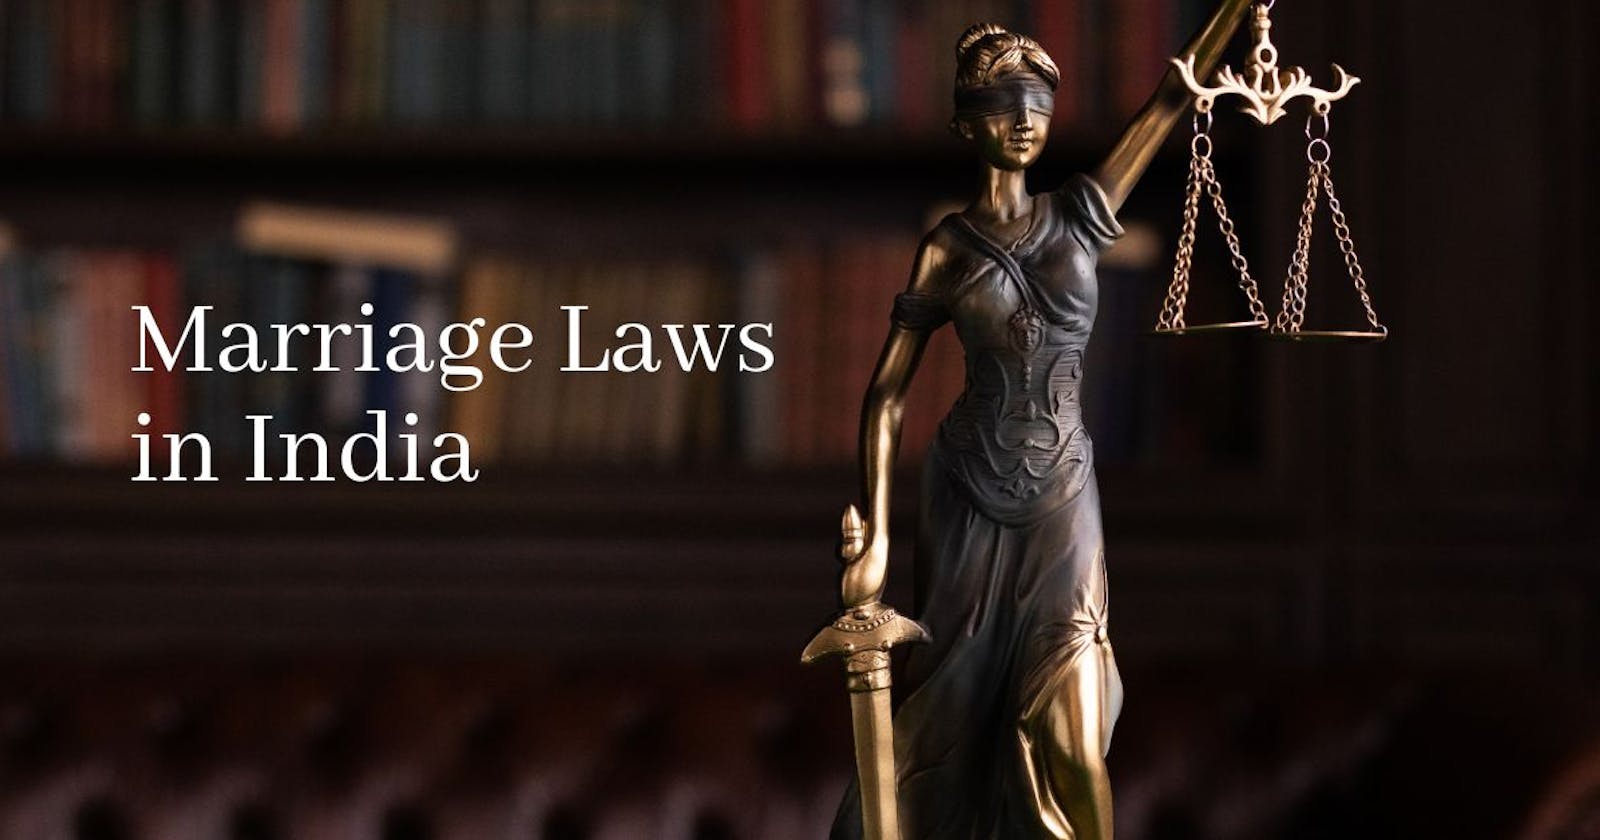 What are the different Marriage Laws in India?